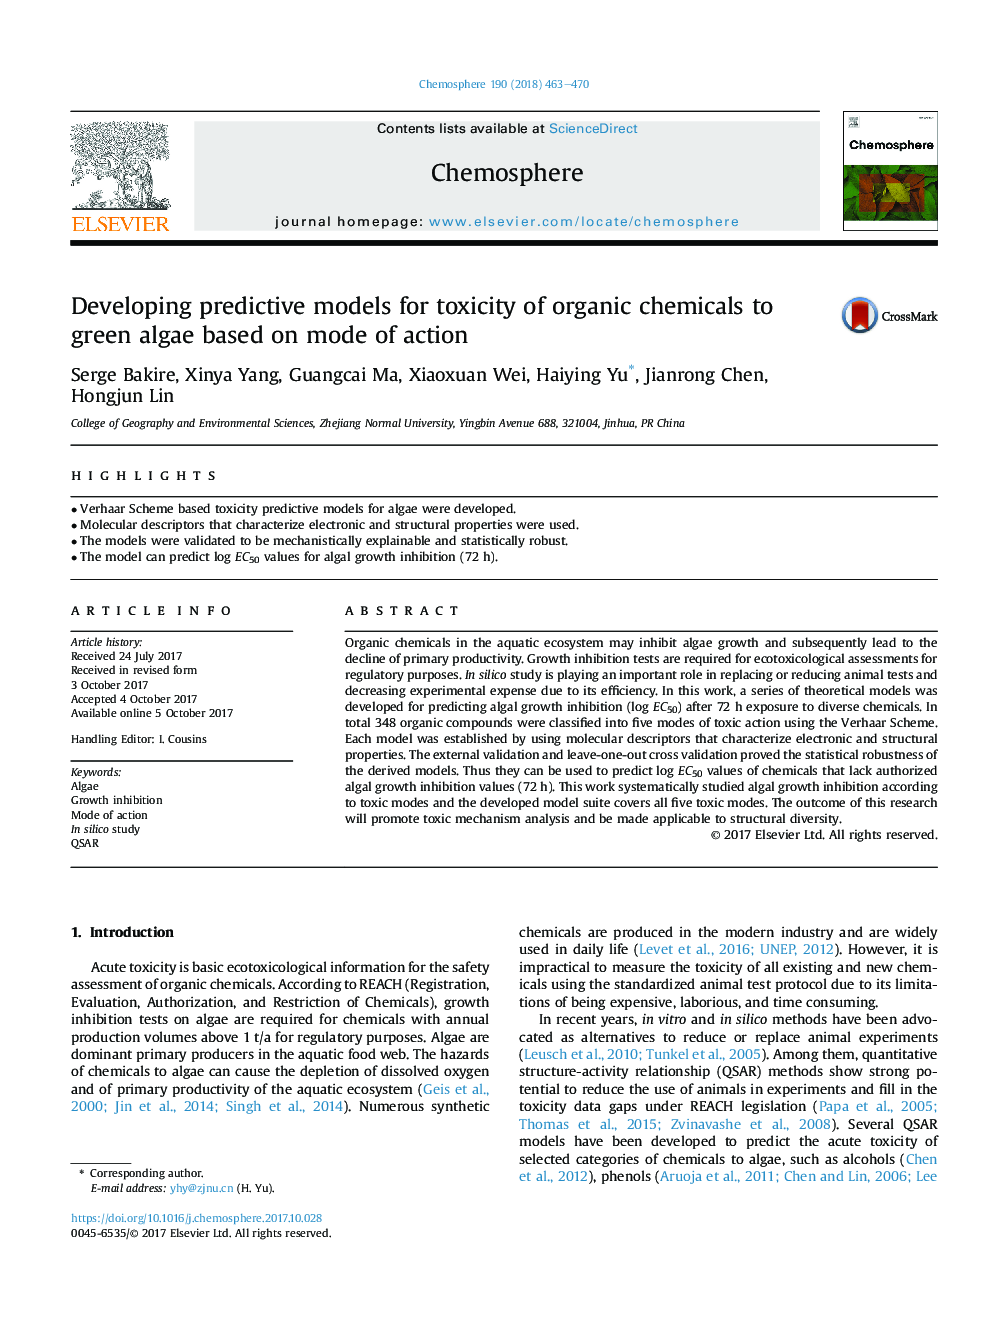 Developing predictive models for toxicity of organic chemicals to green algae based on mode of action